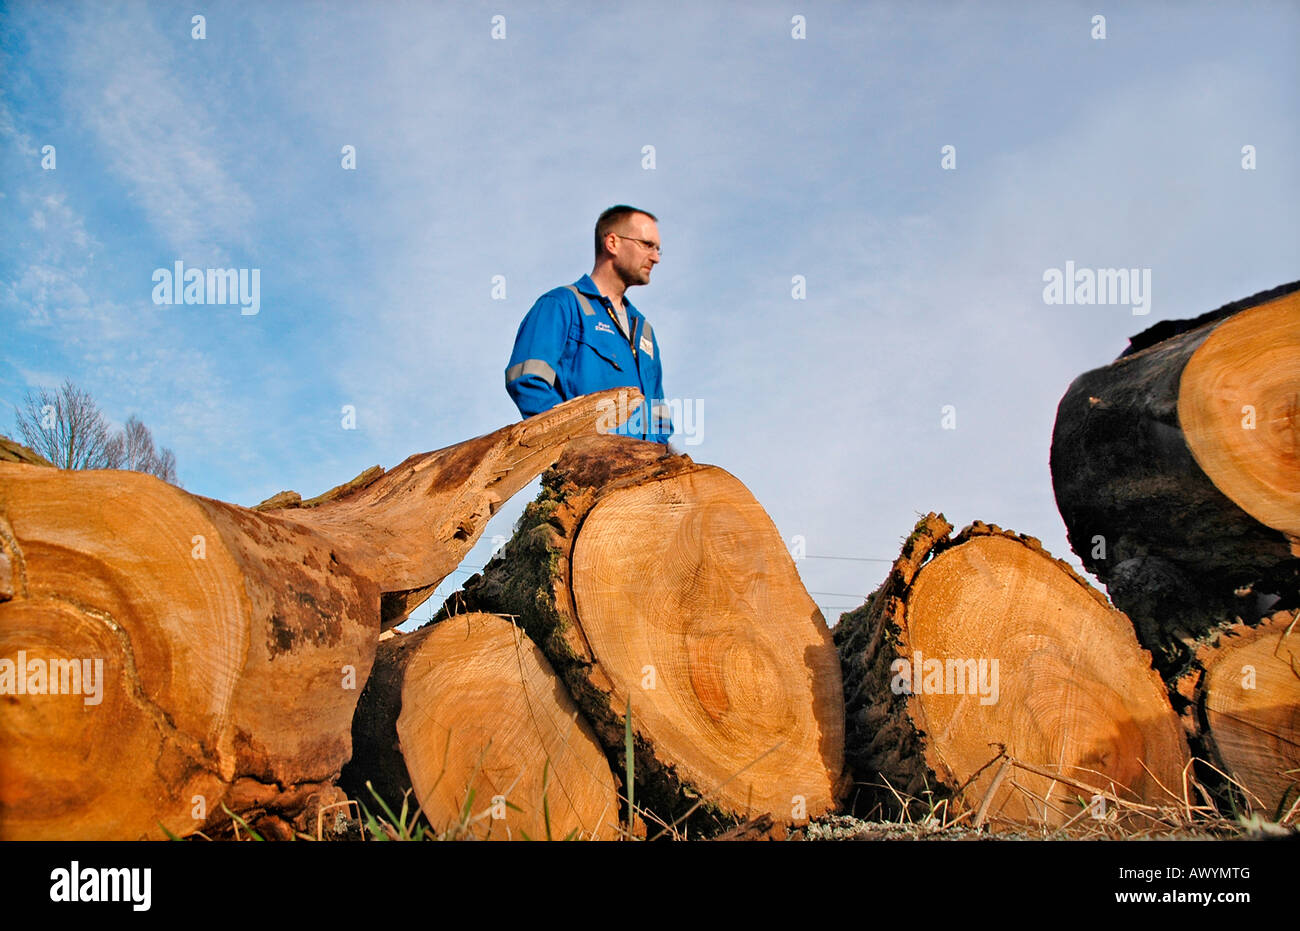 A log cutter takes a break from his work Stock Photo